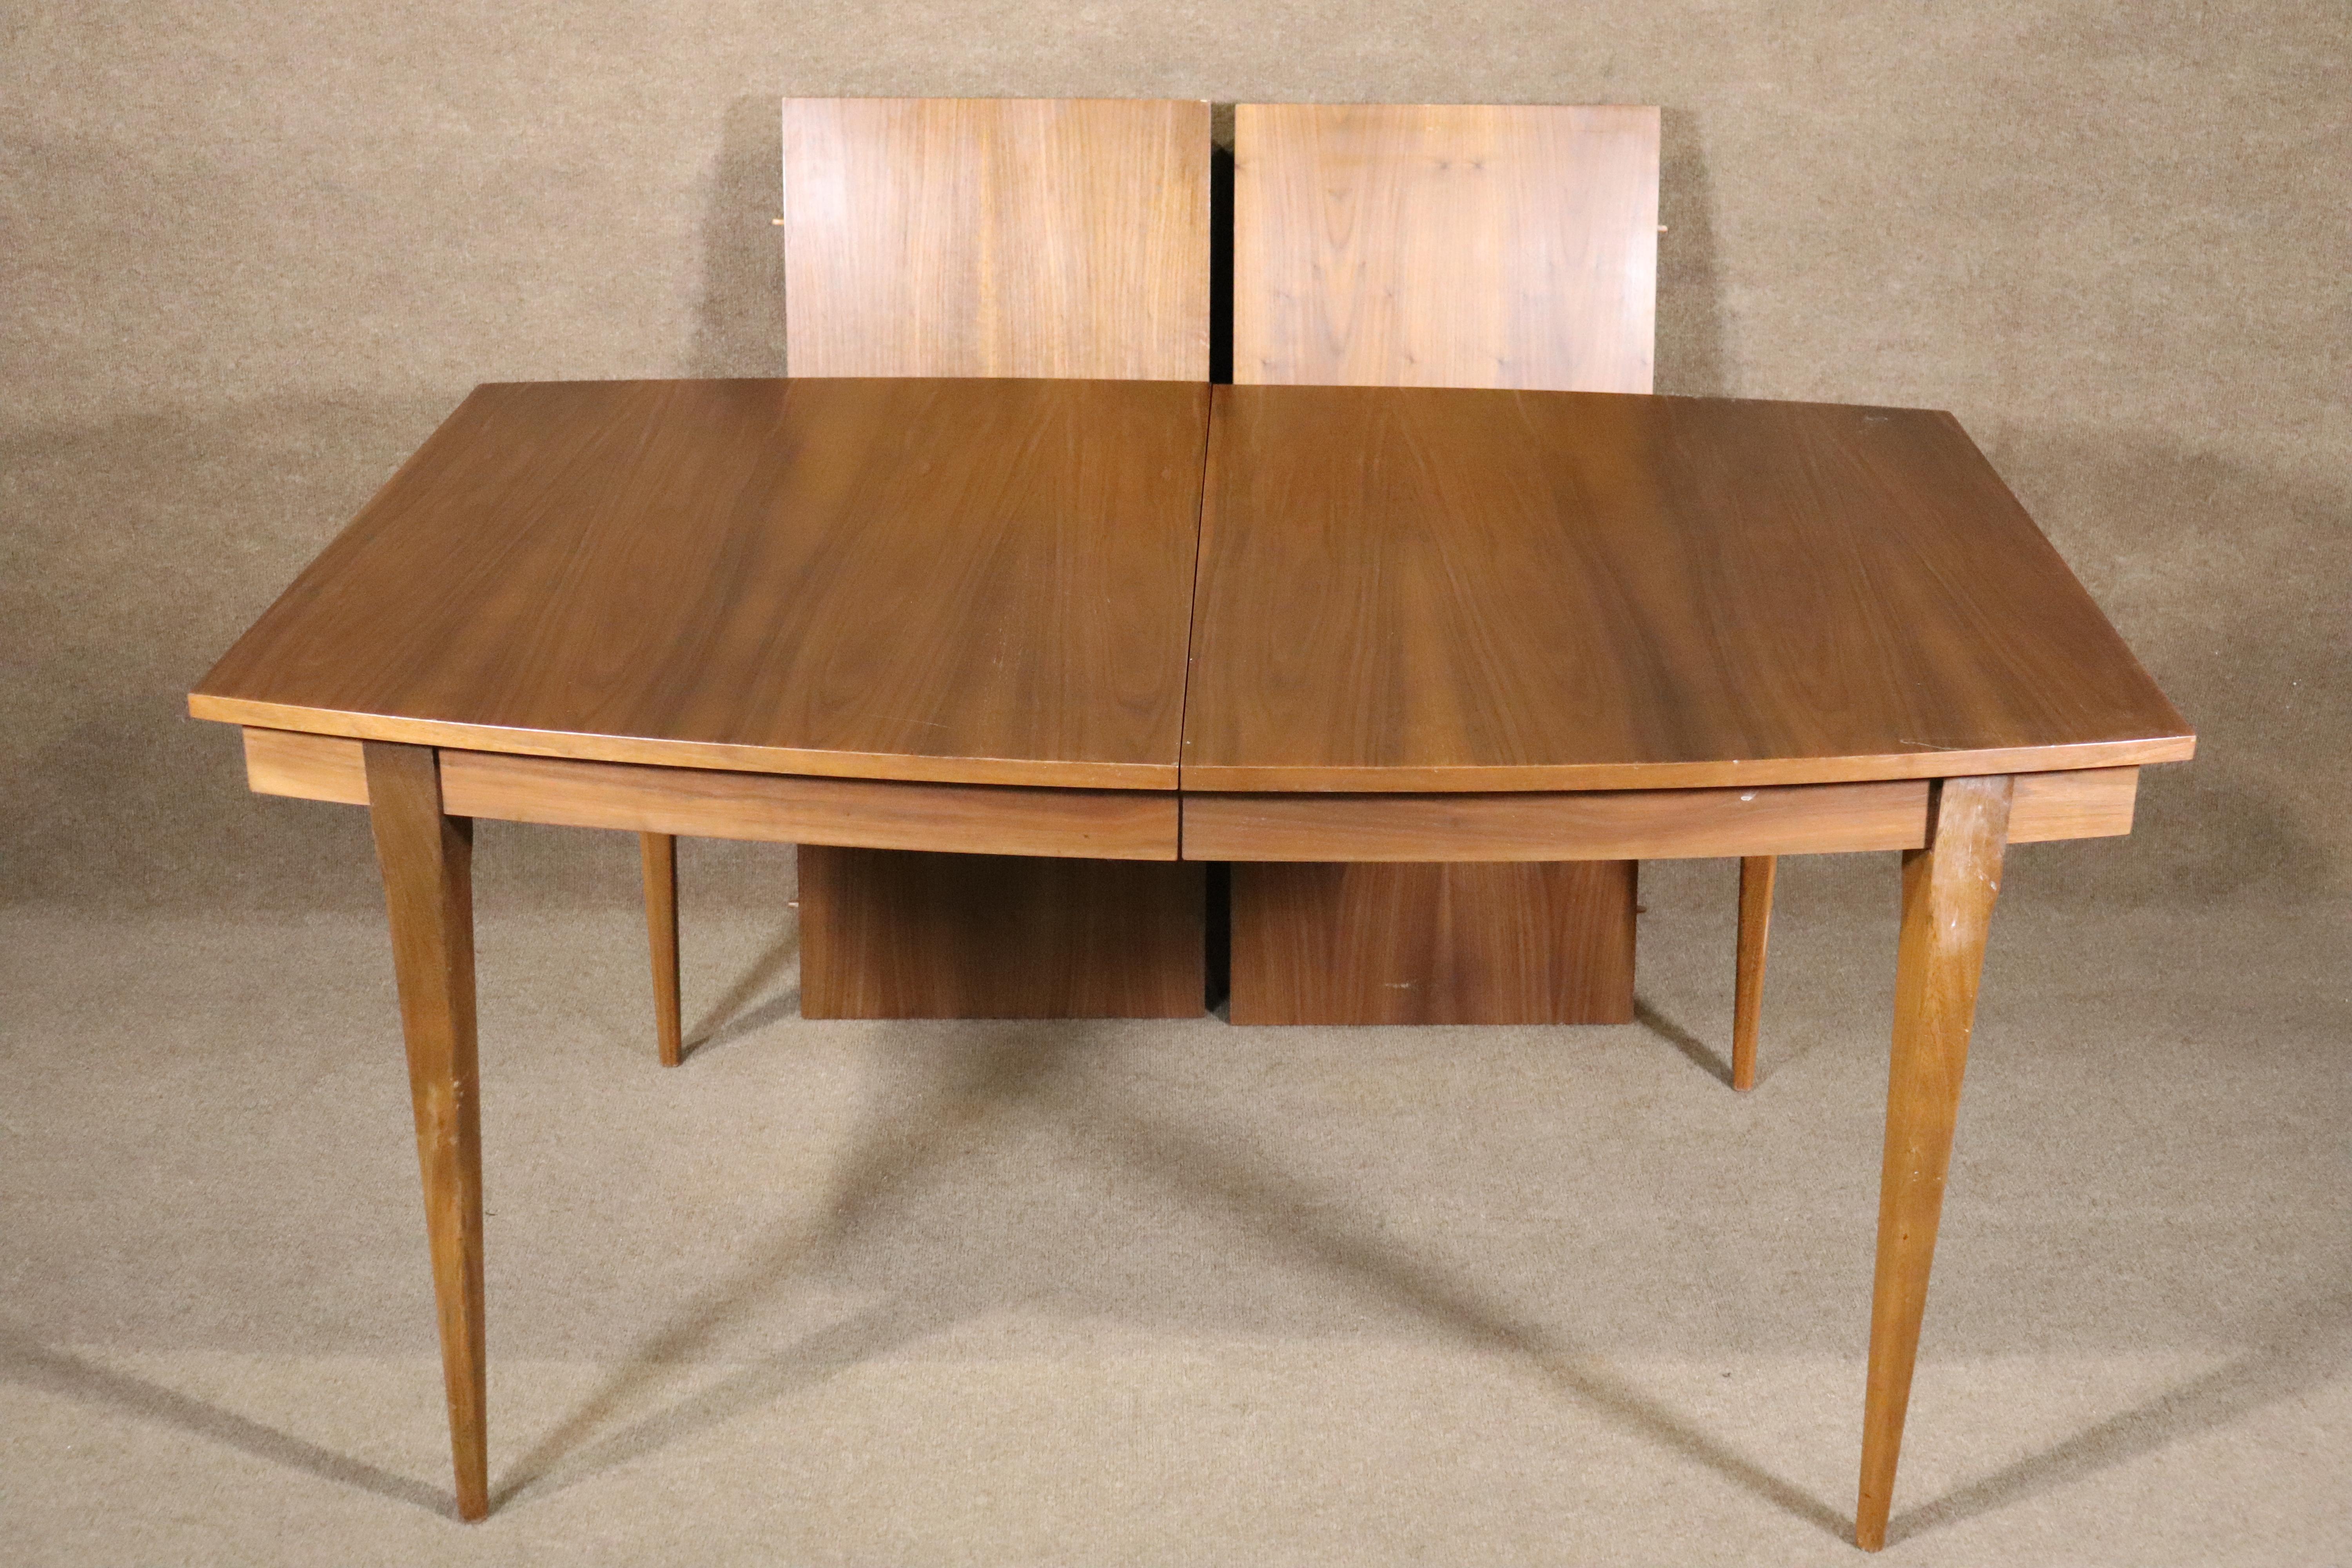 Semi oval dining table with two 18